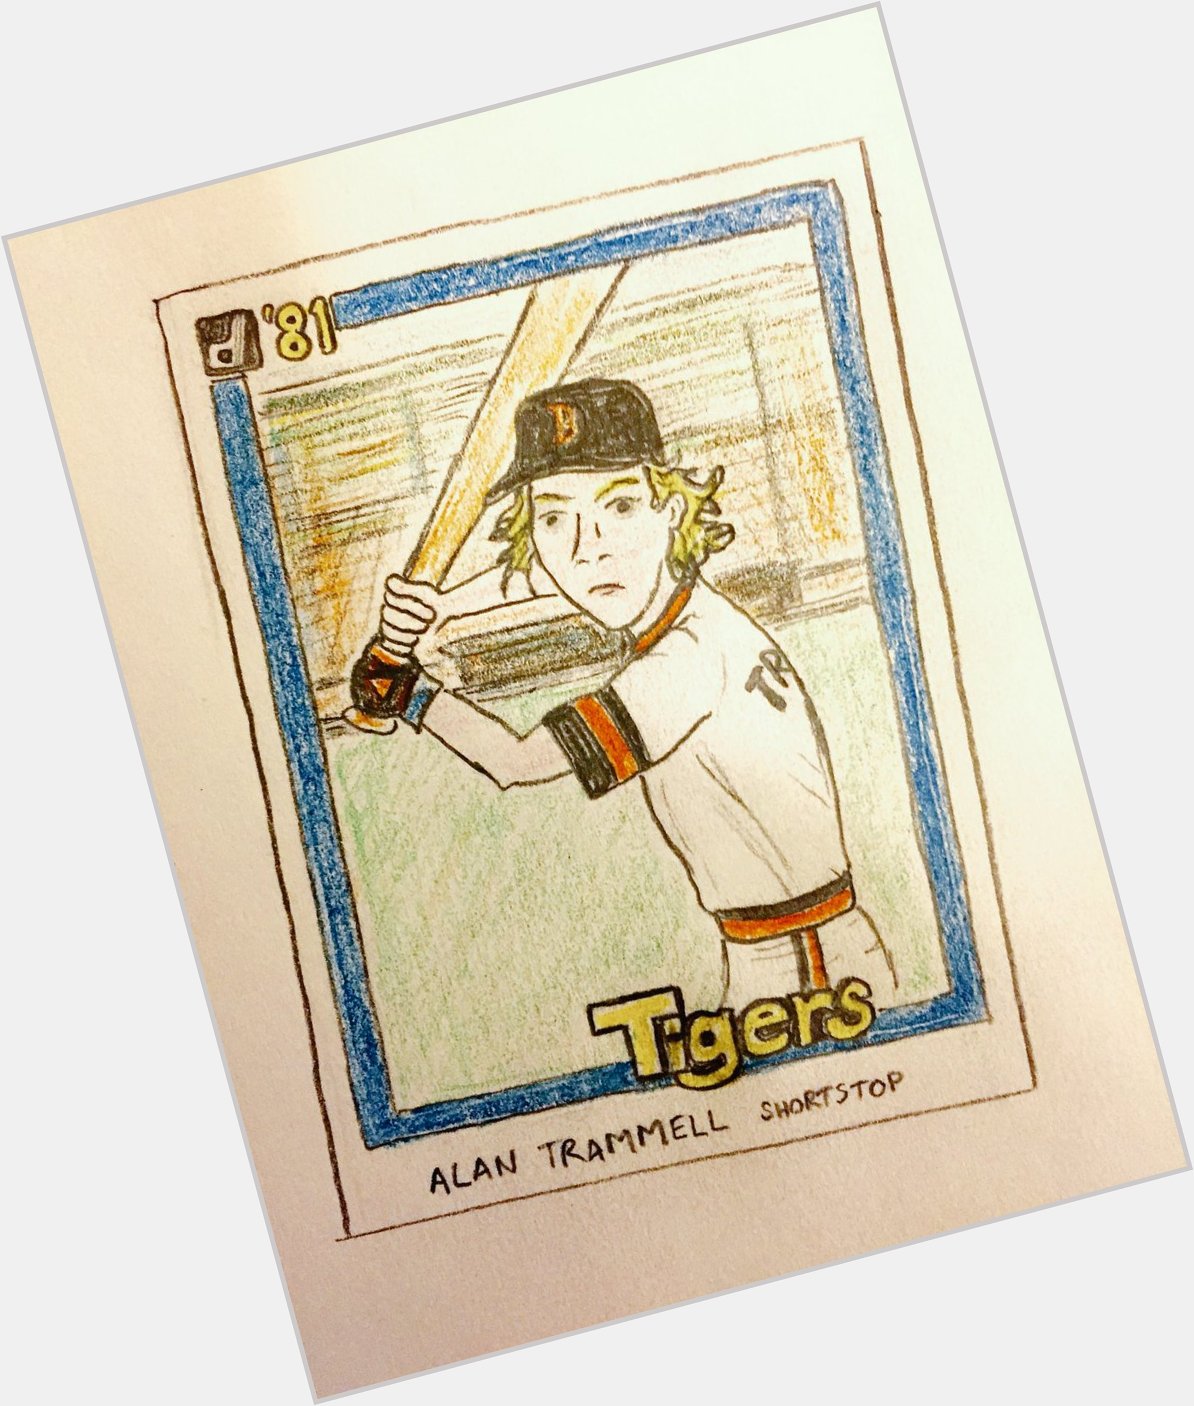 Wishing a very happy 59th birthday to Alan Trammell! 